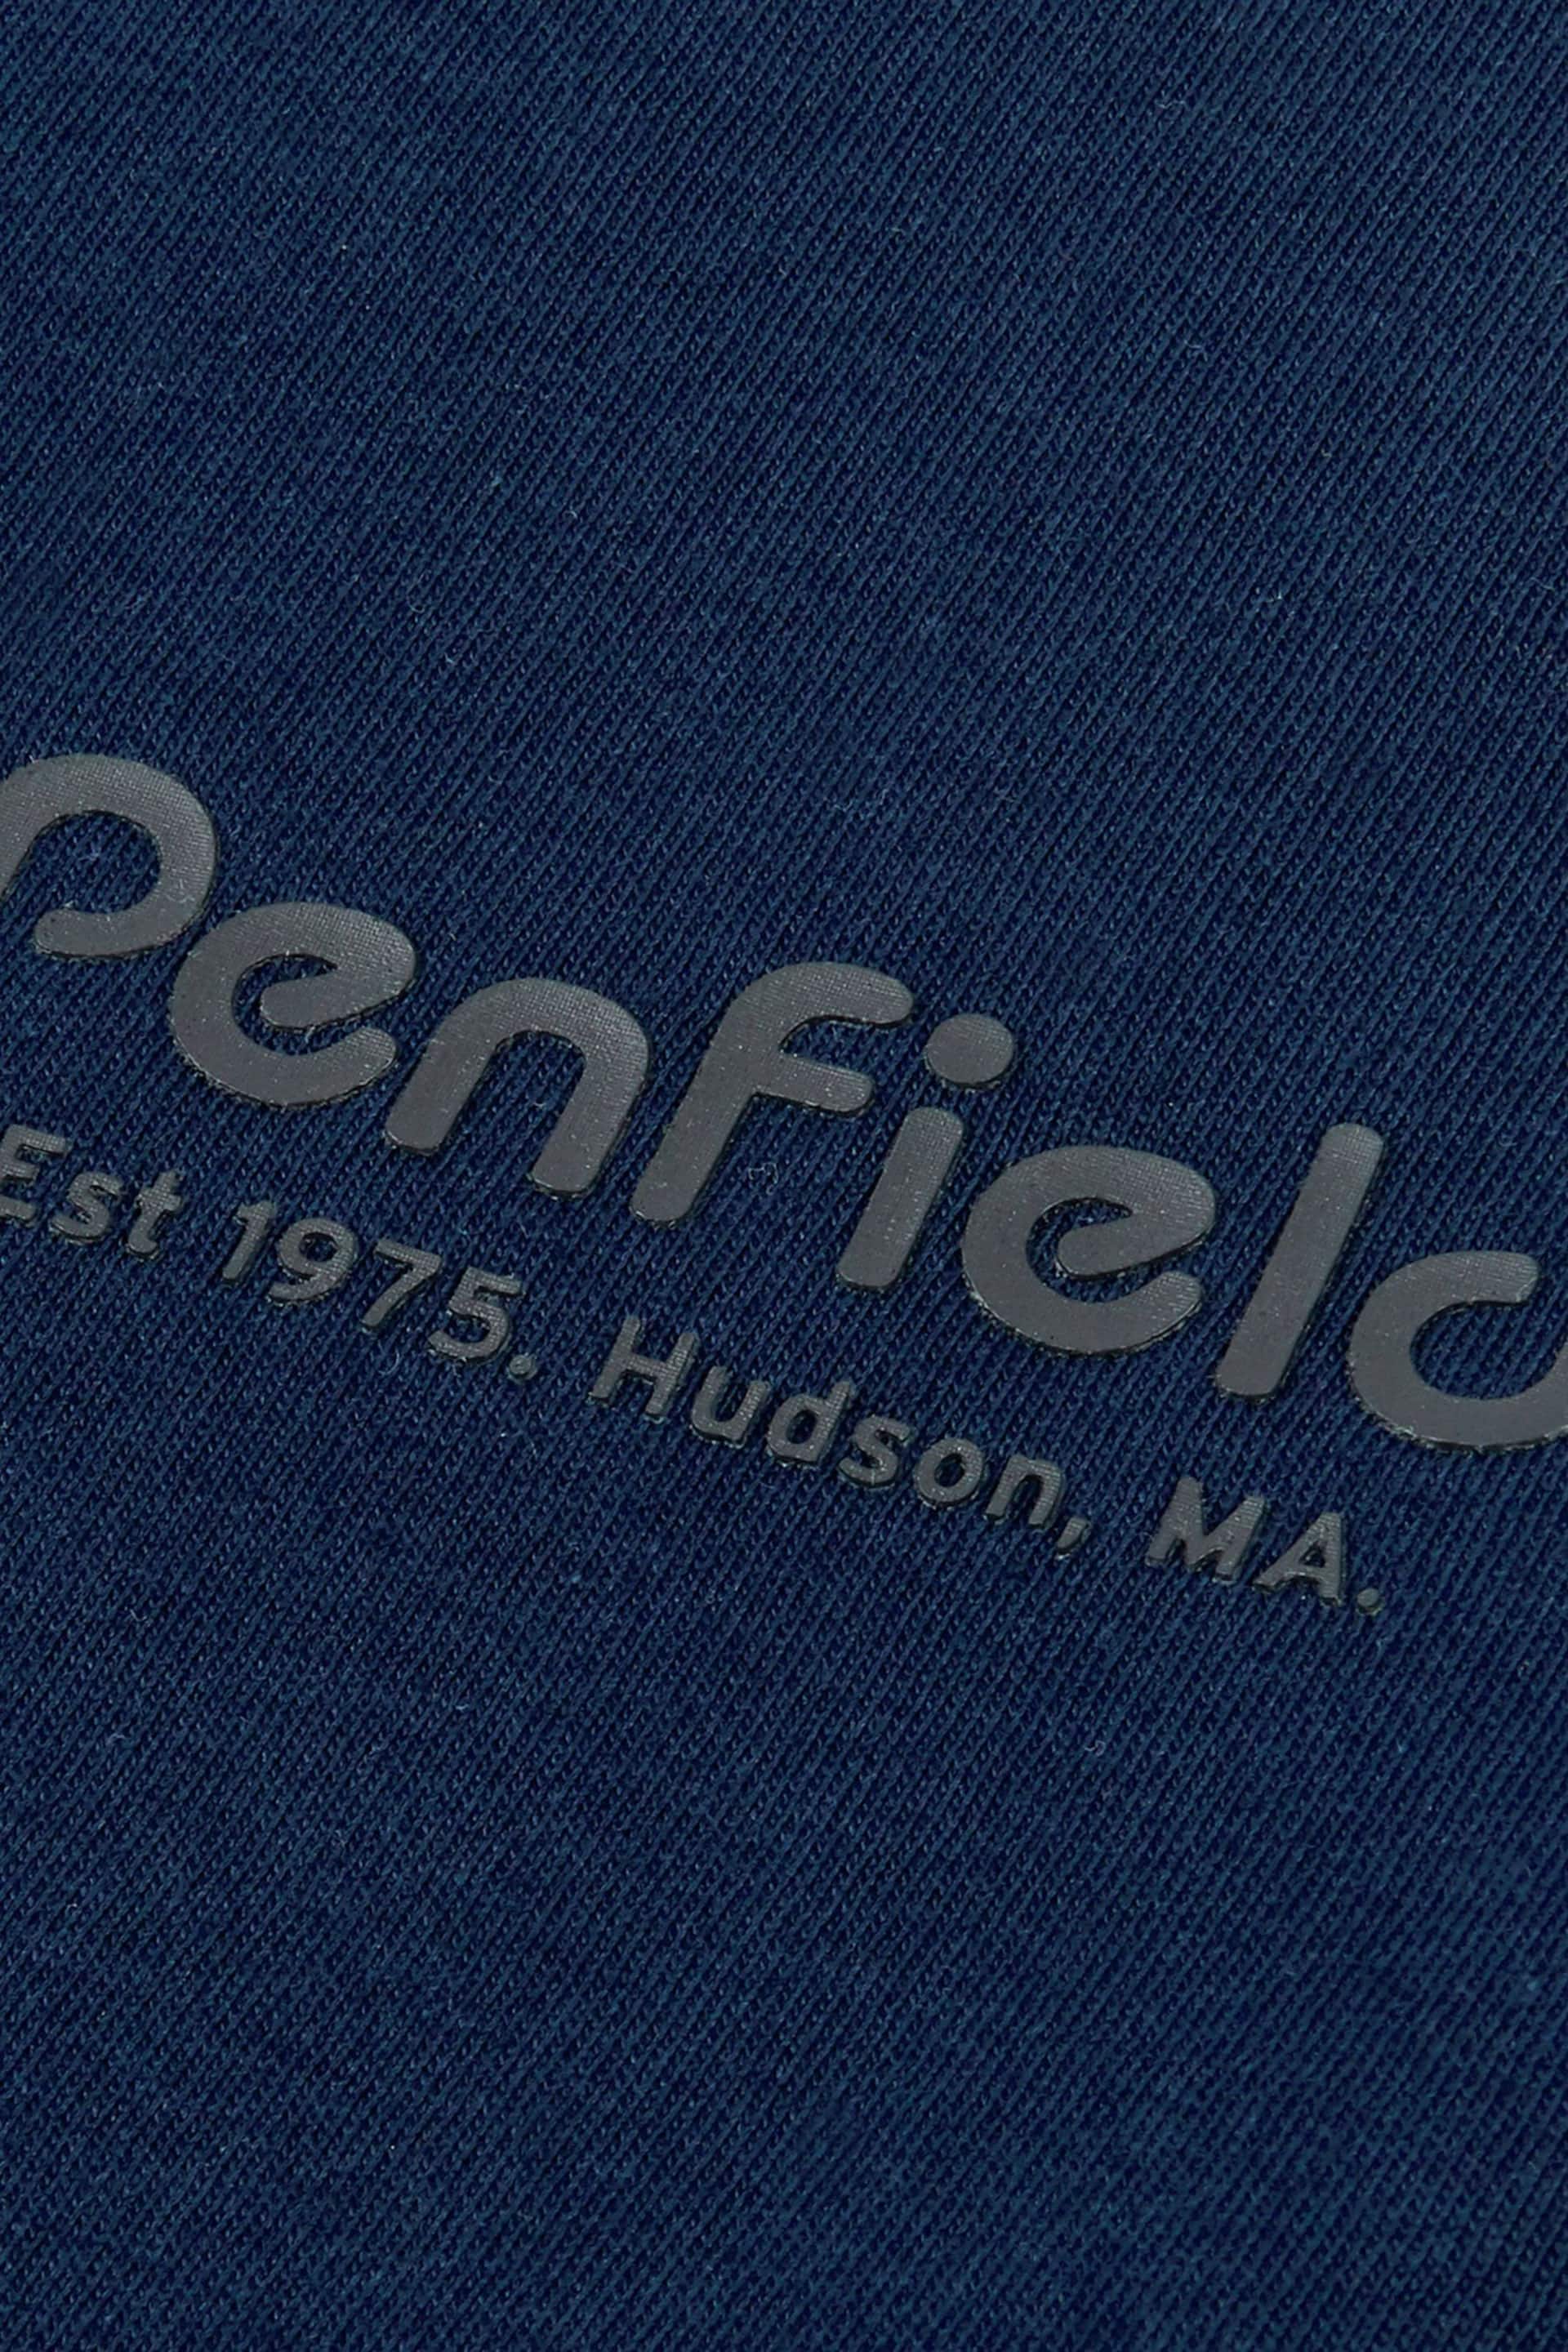 Penfield Blue Arc Mountain Back Graphic Long-Sleeved T-Shirt - Image 9 of 10